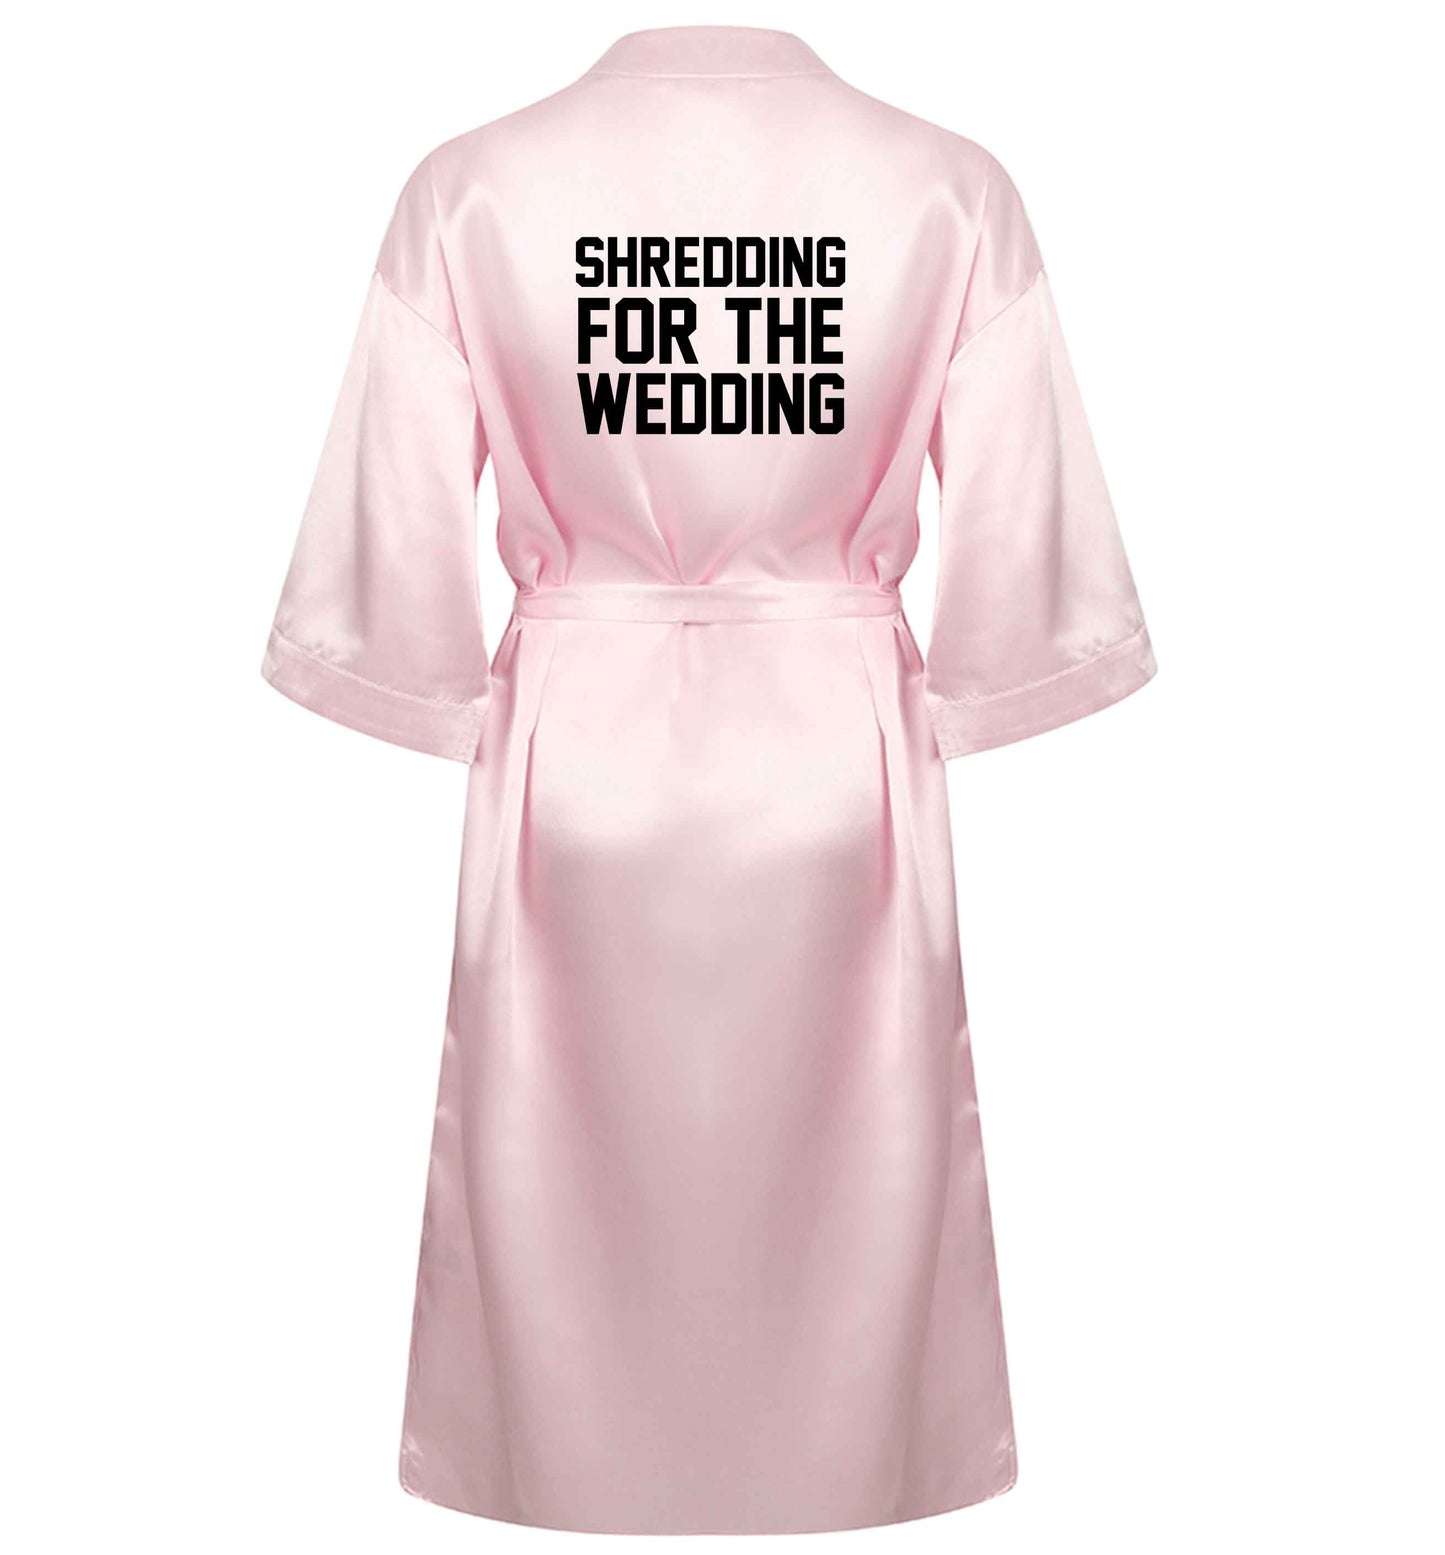 Get motivated and get fit for your big day! Our workout quotes and designs will get you ready to sweat! Perfect for any bride, groom or bridesmaid to be!  XL/XXL pink  ladies dressing gown size 16/18